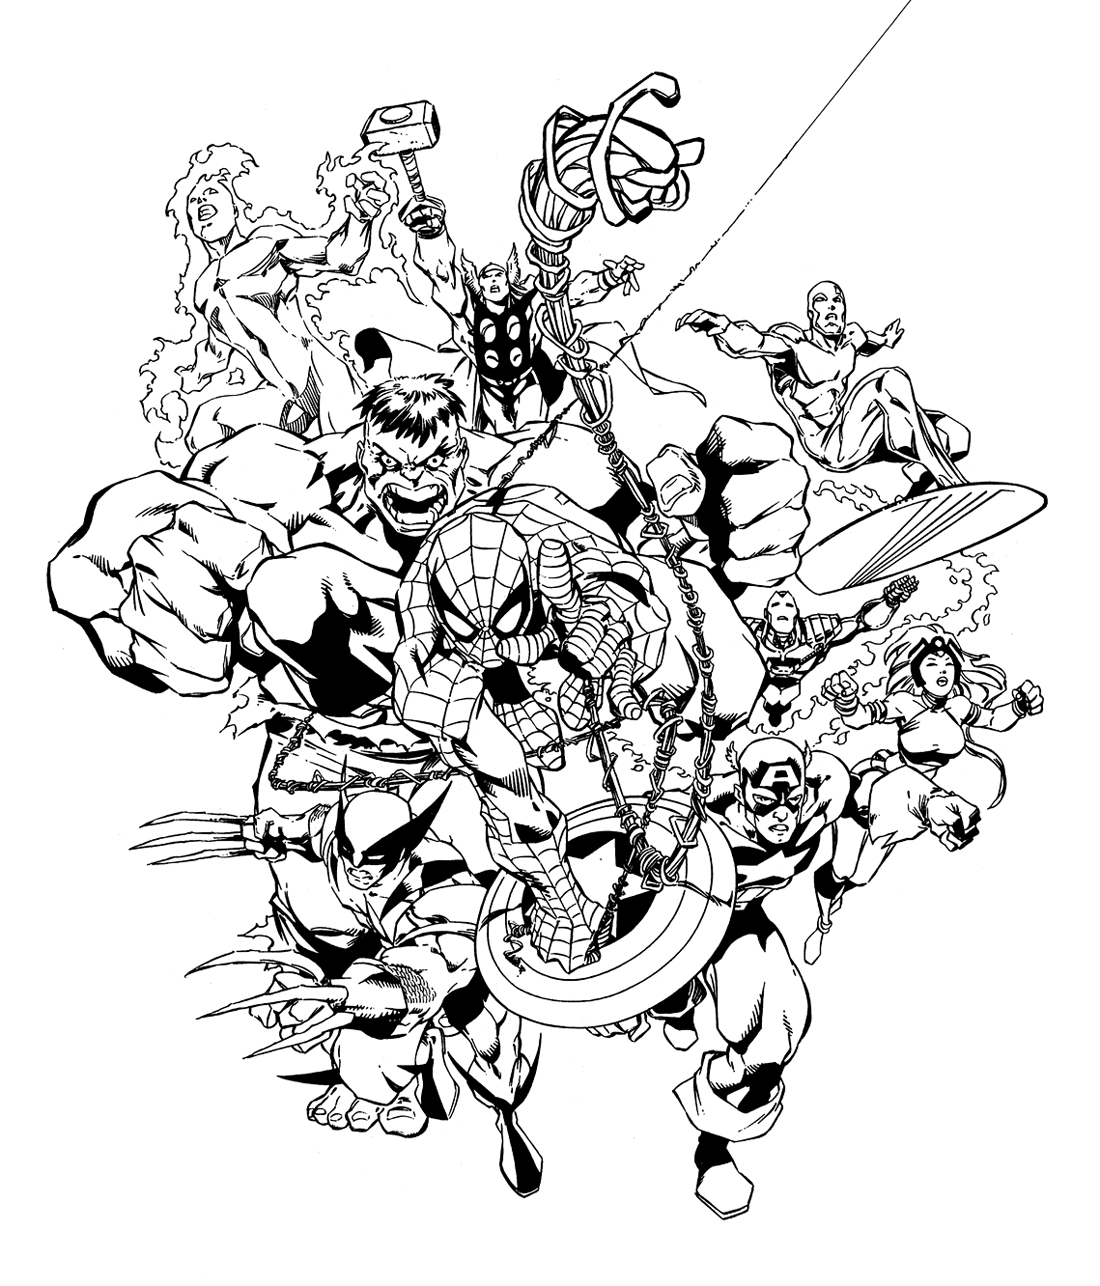 marvel superheroes coloring pages